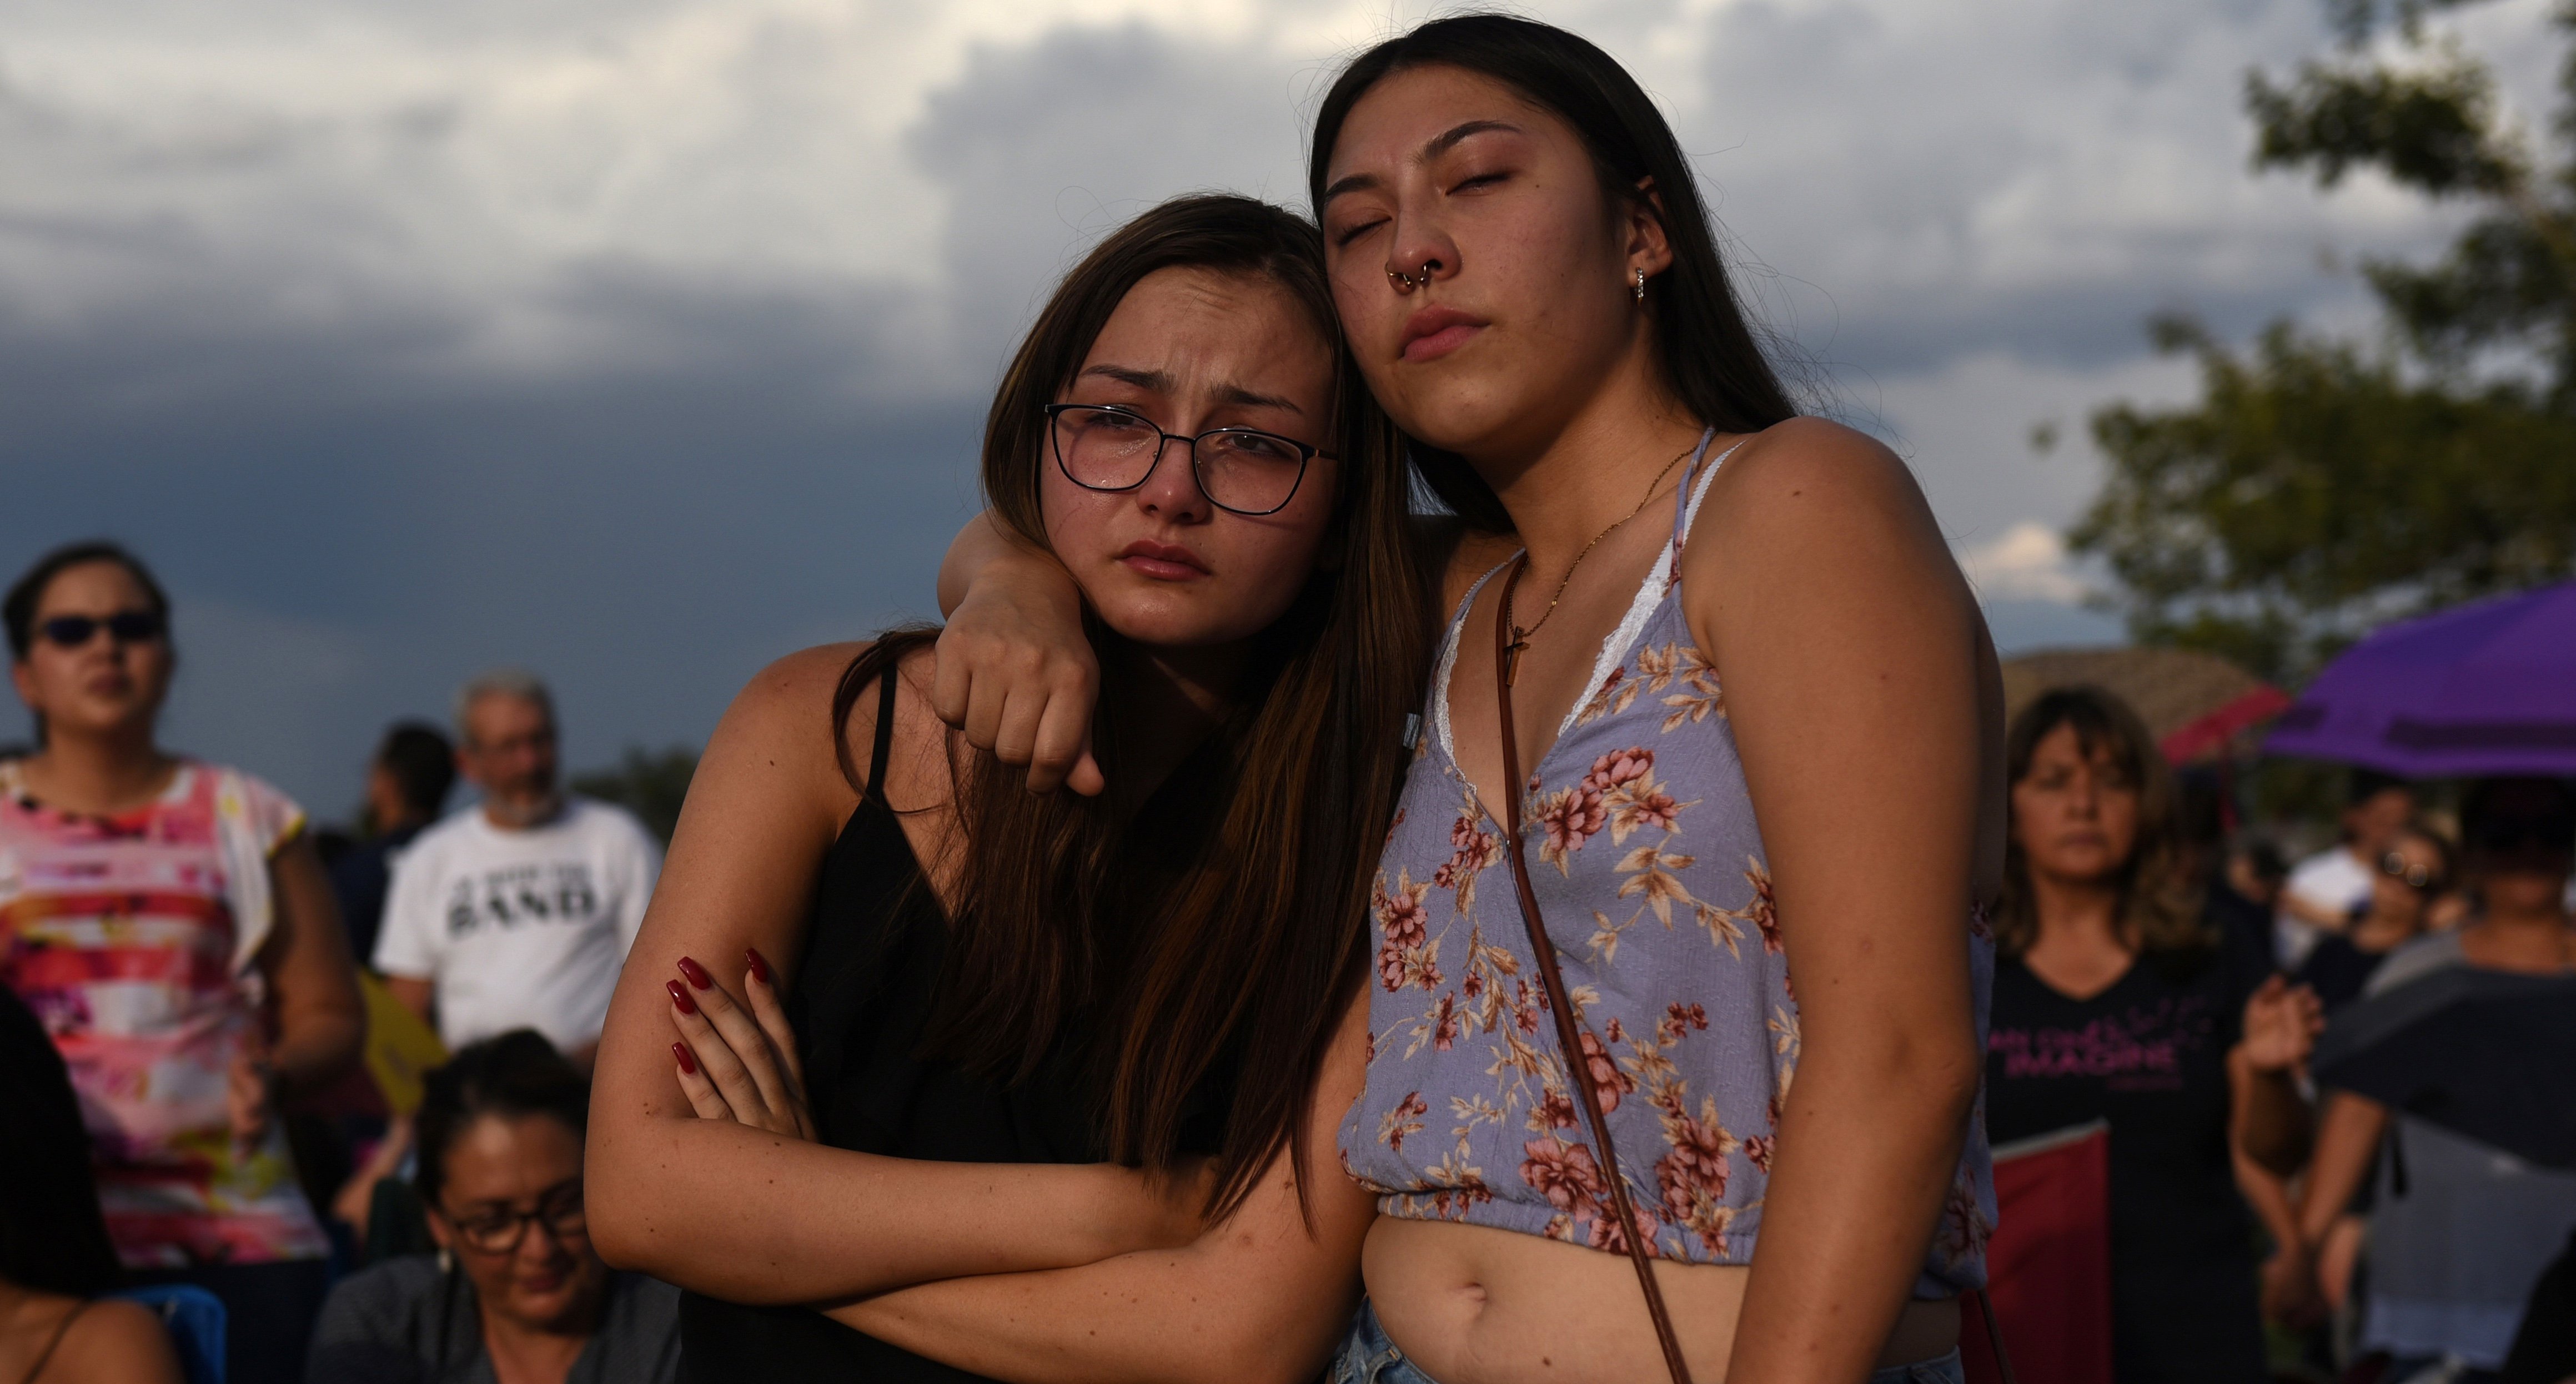 Amber Ruiz and Jazmyn Blake embrace during a vigil a day after a mass shooting at a Walmart store in El Paso, Texas, U.S. August 4, 2019. REUTERS/Callaghan O'Hare